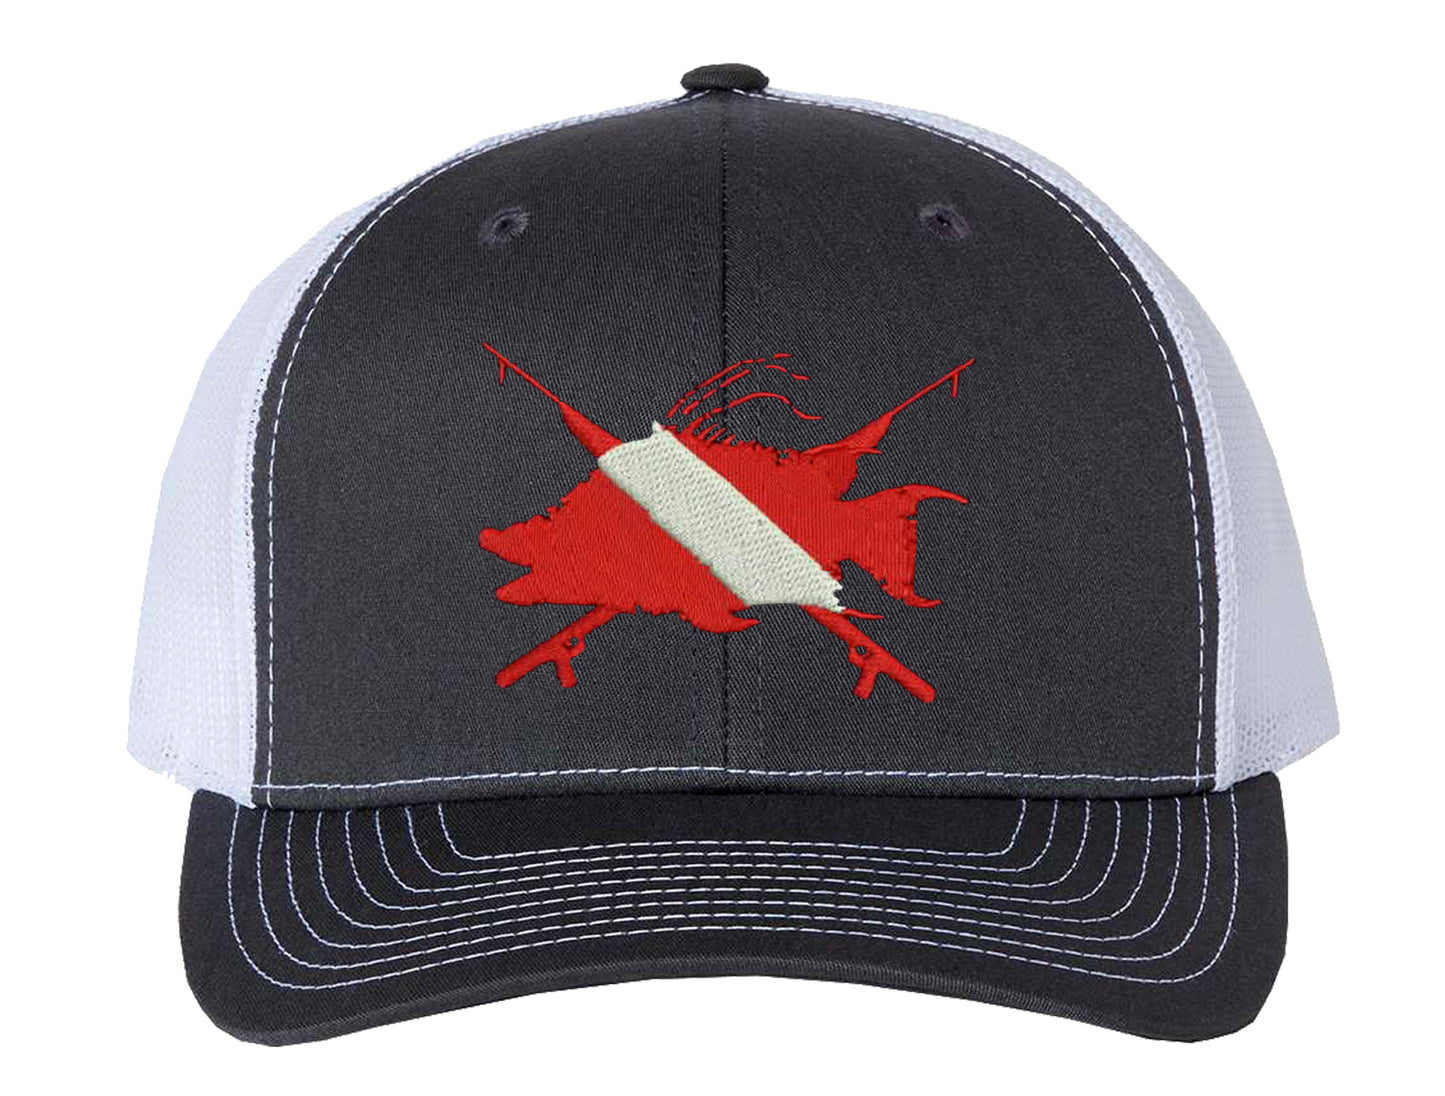 Hogfish Dive Spears Structured Charcoal/White Trucker Hat